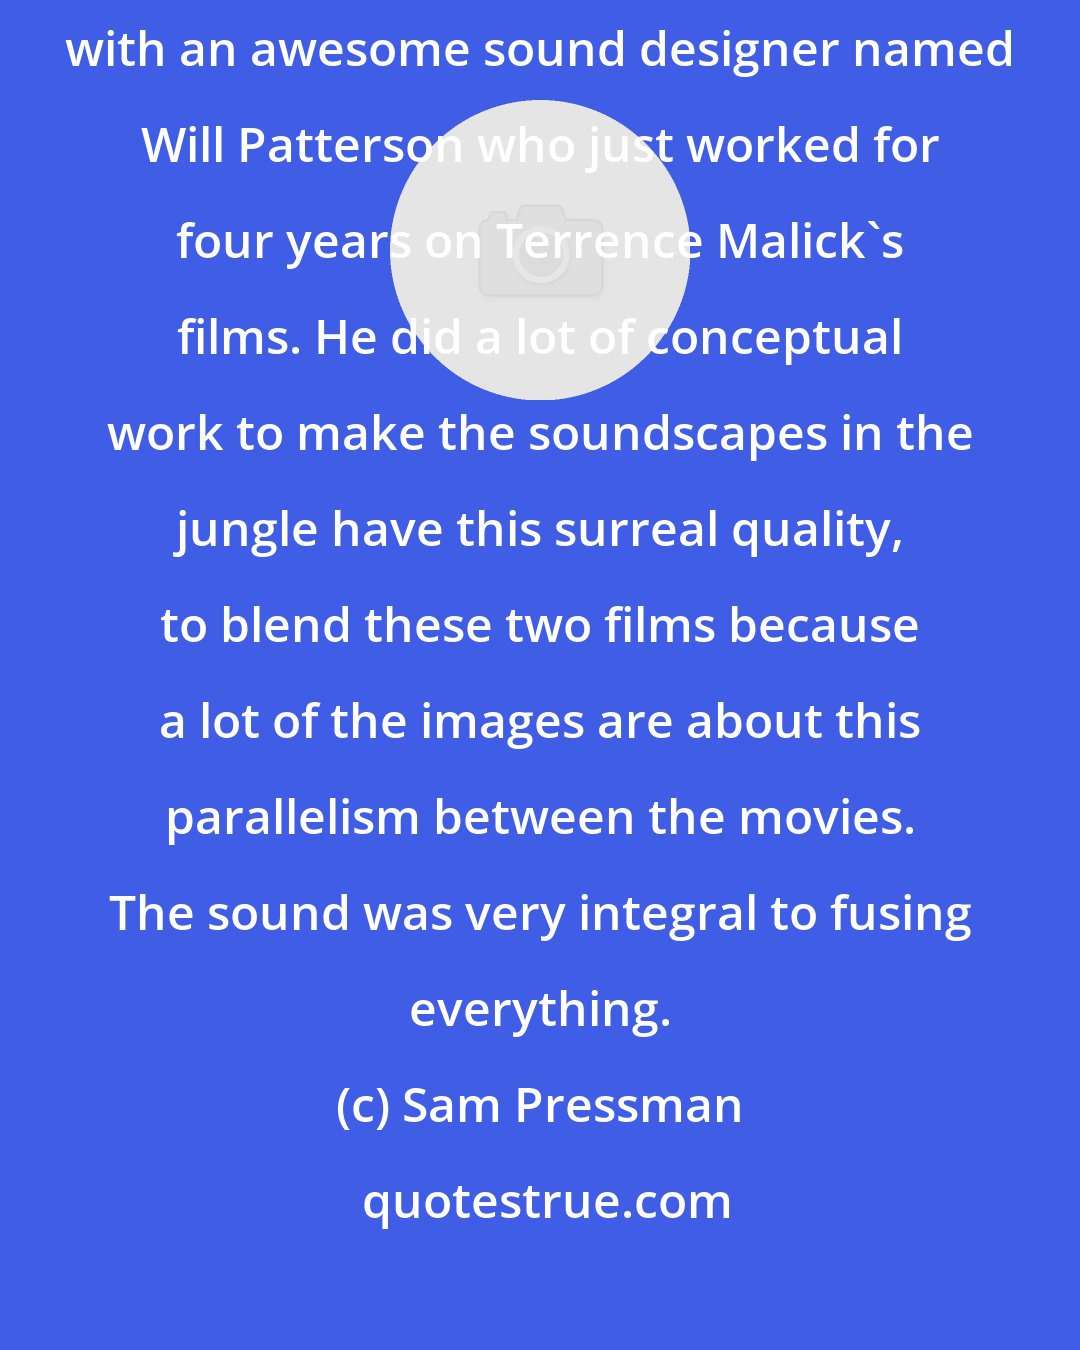 Sam Pressman: Because of Walter, we did it the other way around. We also worked with an awesome sound designer named Will Patterson who just worked for four years on Terrence Malick's films. He did a lot of conceptual work to make the soundscapes in the jungle have this surreal quality, to blend these two films because a lot of the images are about this parallelism between the movies. The sound was very integral to fusing everything.